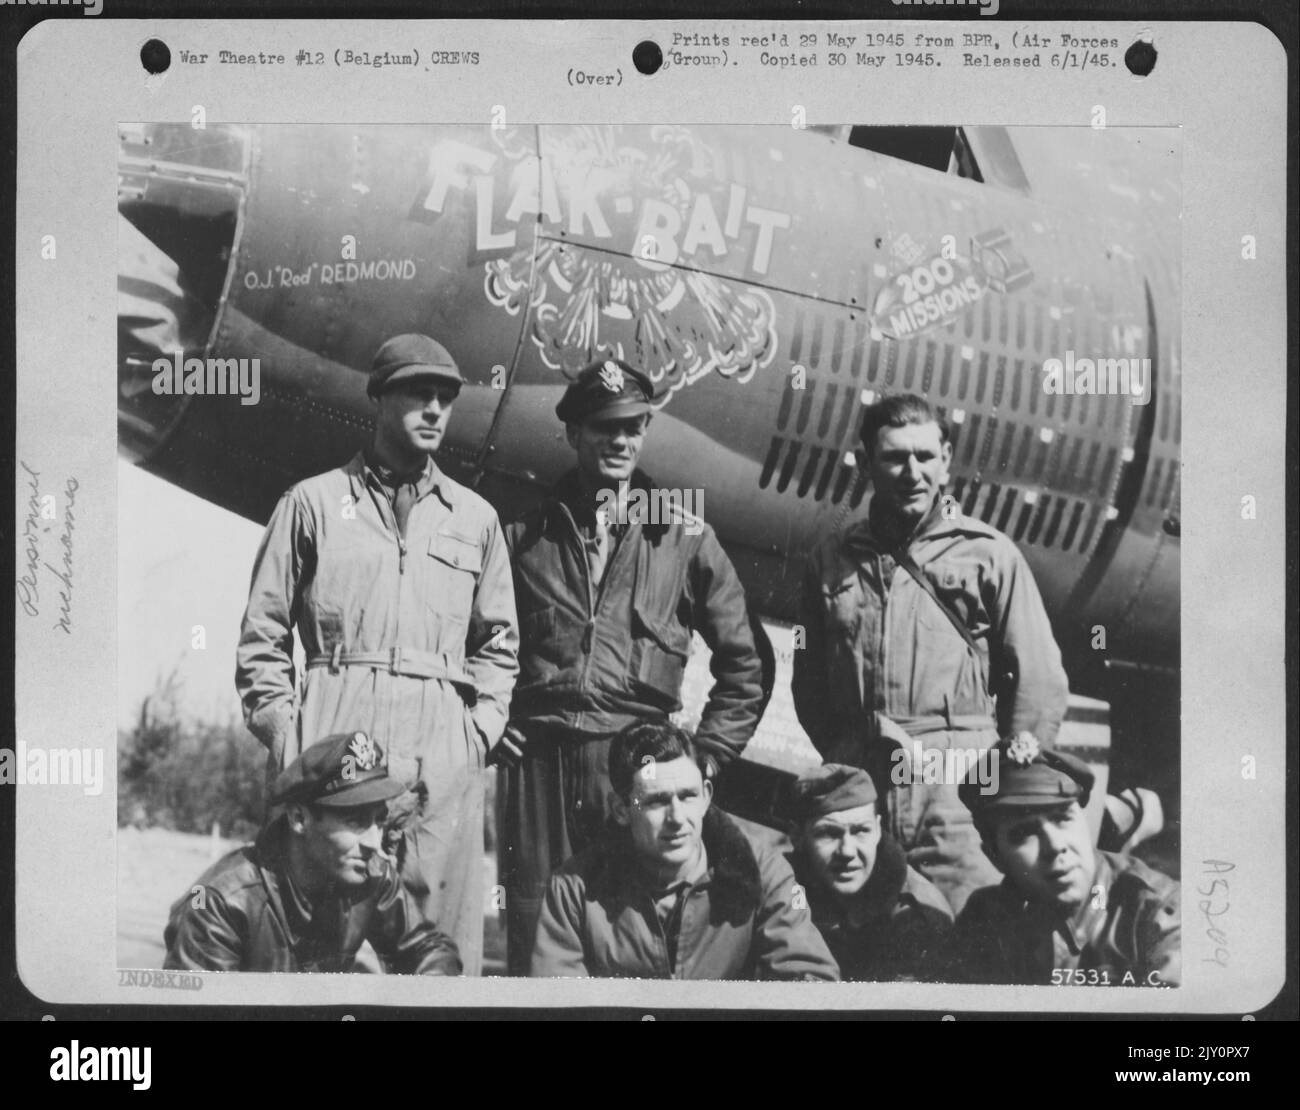 The Crew Of 'Flak Bait', First Martin B-26 Marauder To Complete 200 Missions In This Theater Is Shown By The Battle-Scarred Bomber Just After Completing Its 200Th Mission. They Are, Front Row, Left To Right: 1St. Lt. William D. Brearly, Of New York, Bomb Stock Photo